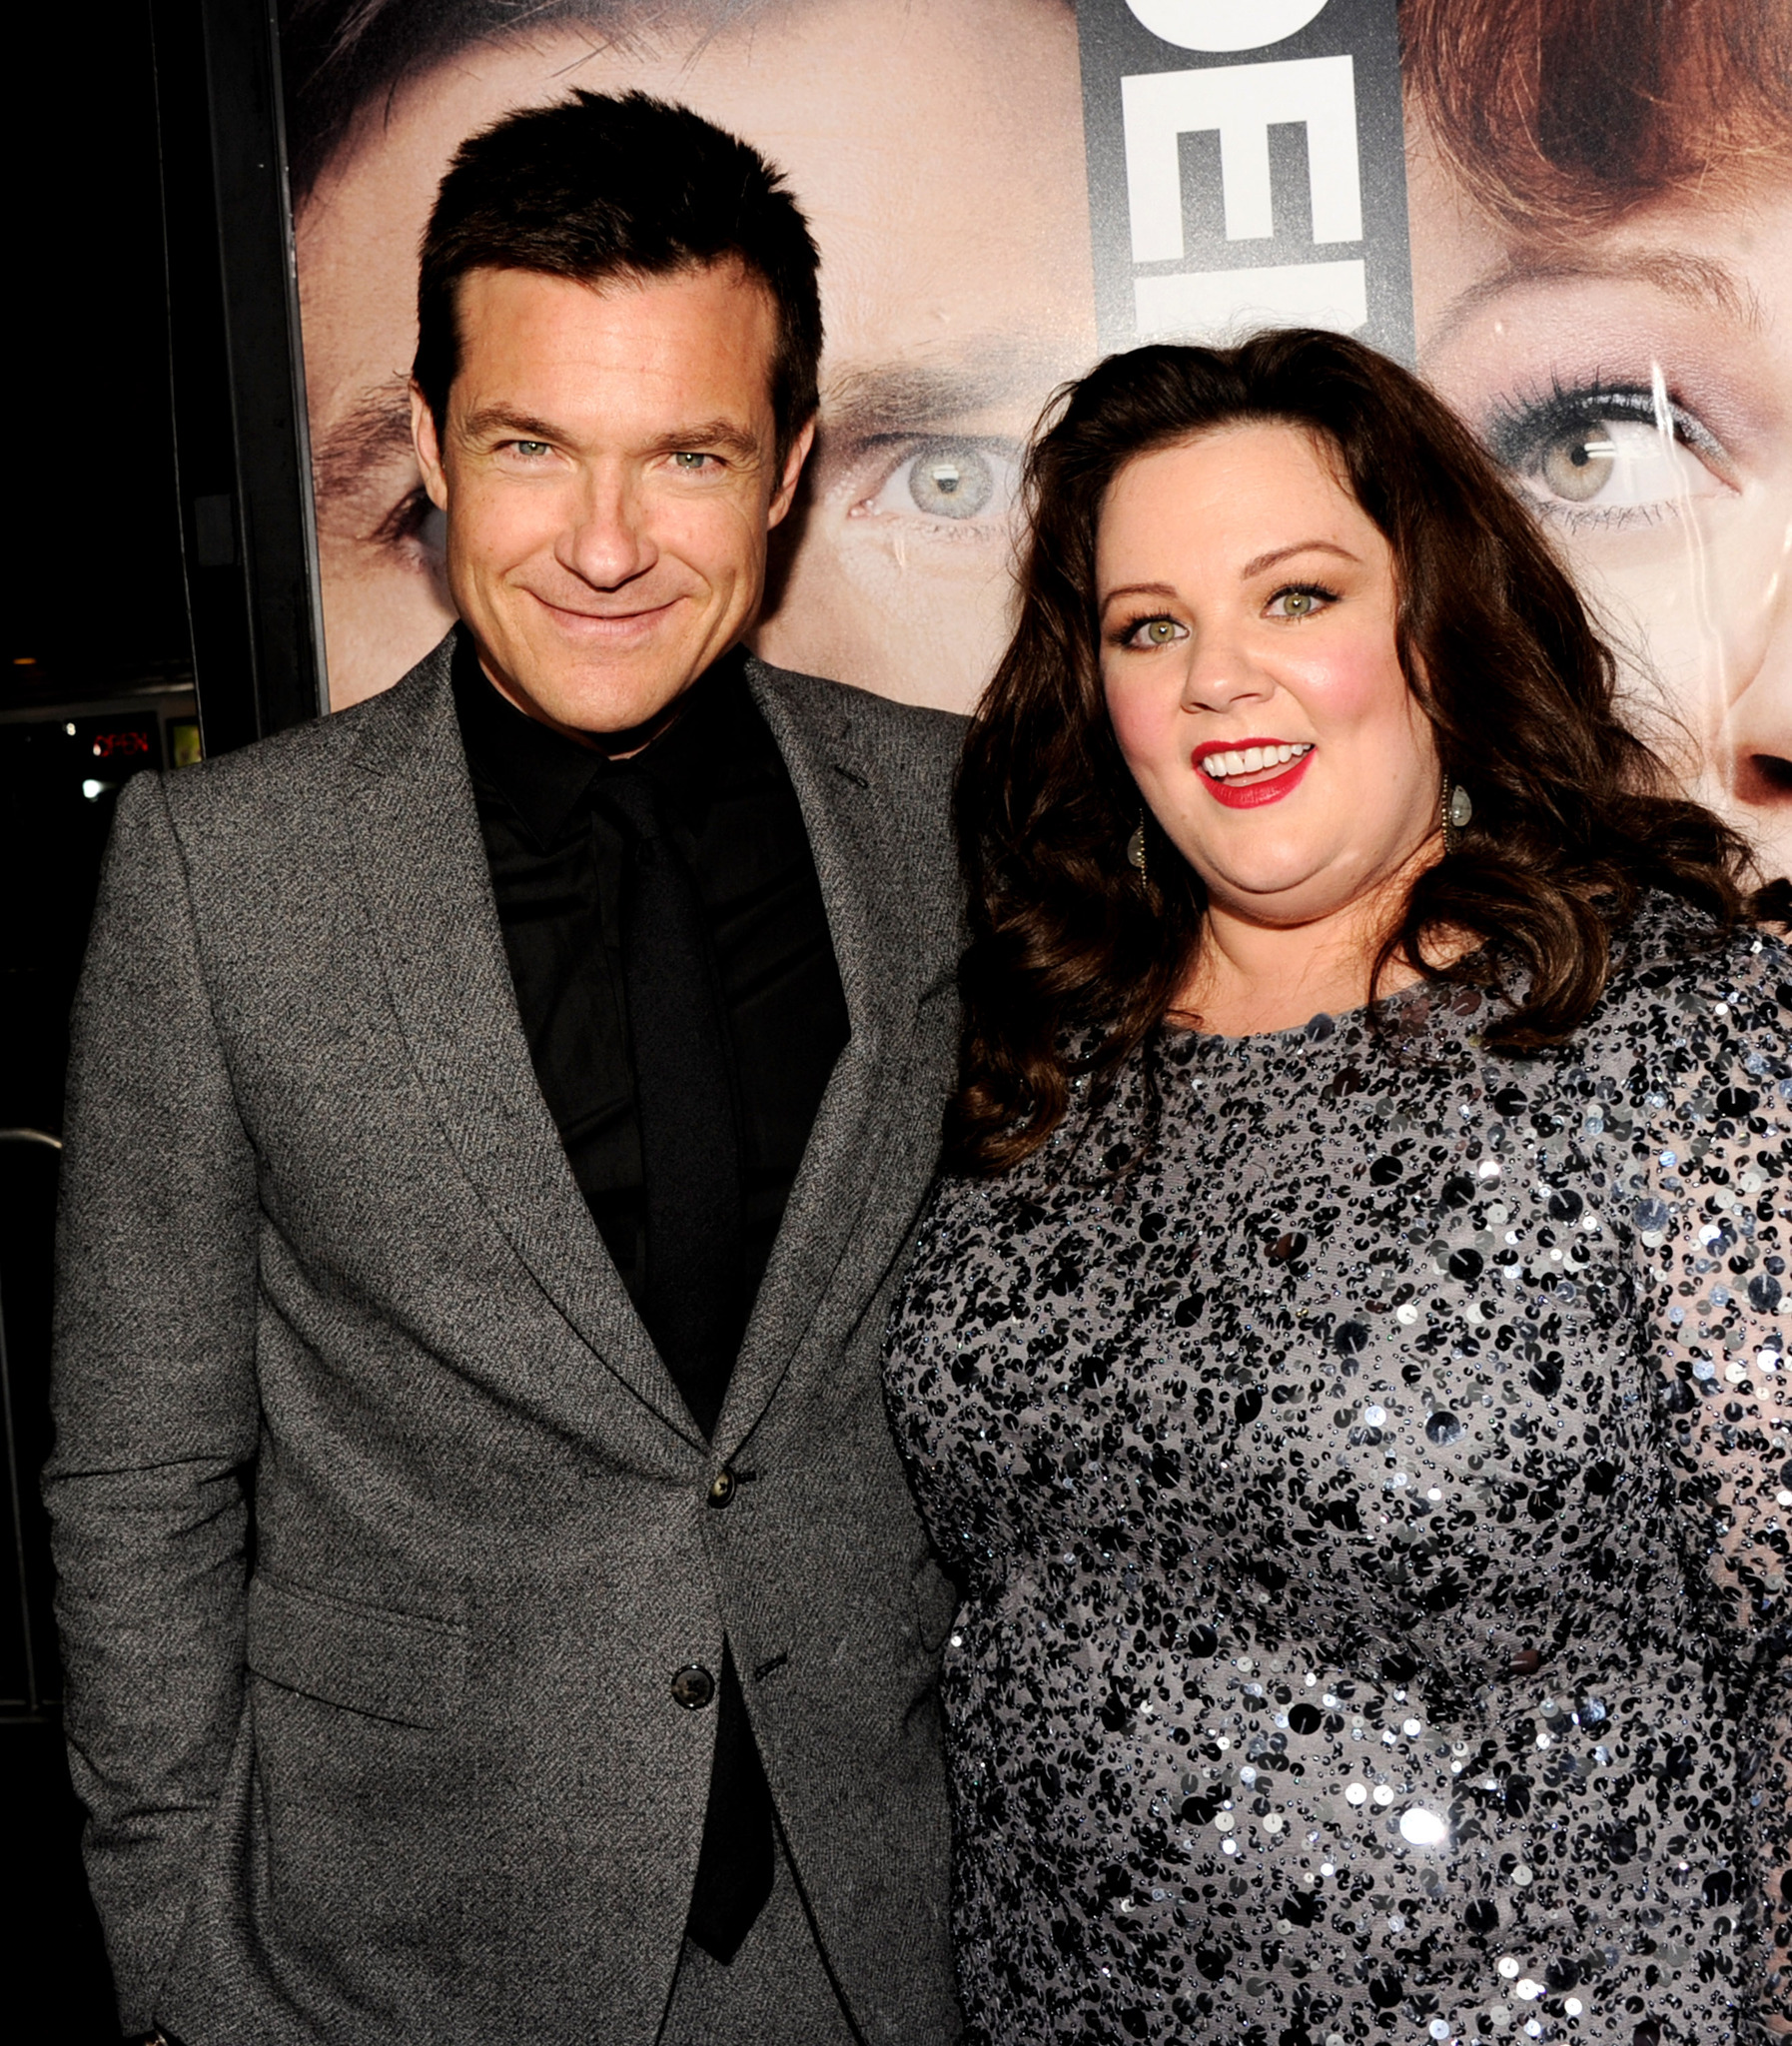 Jason Bateman and Melissa McCarthy arrive at the premiere of Universal Pictures' 